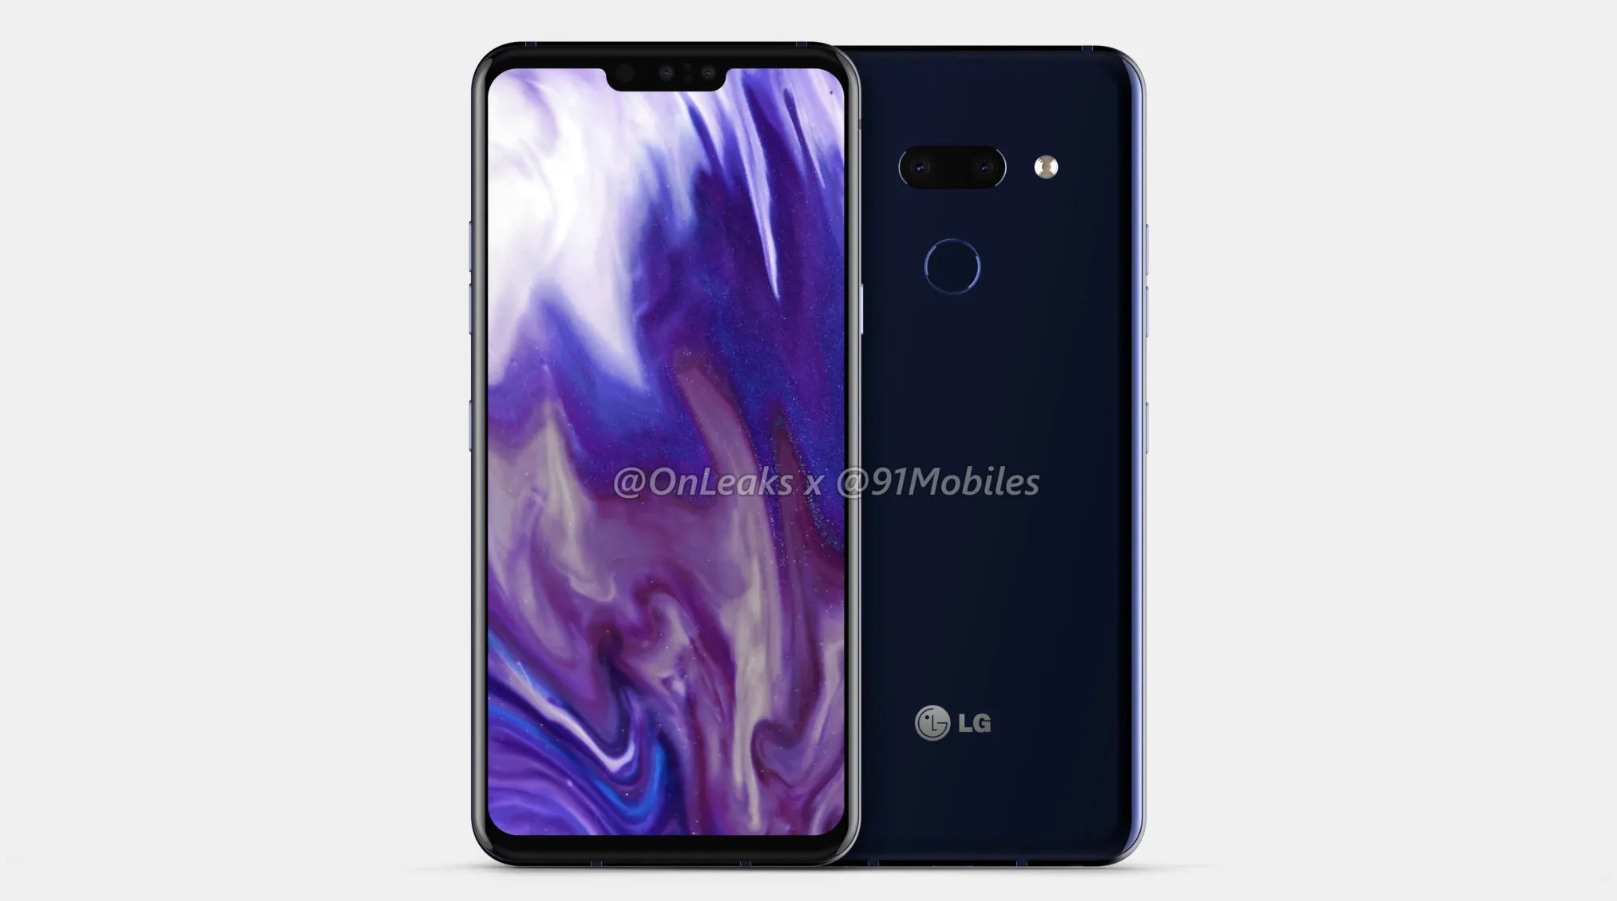 A professional render of the LG G8 ThinQ.